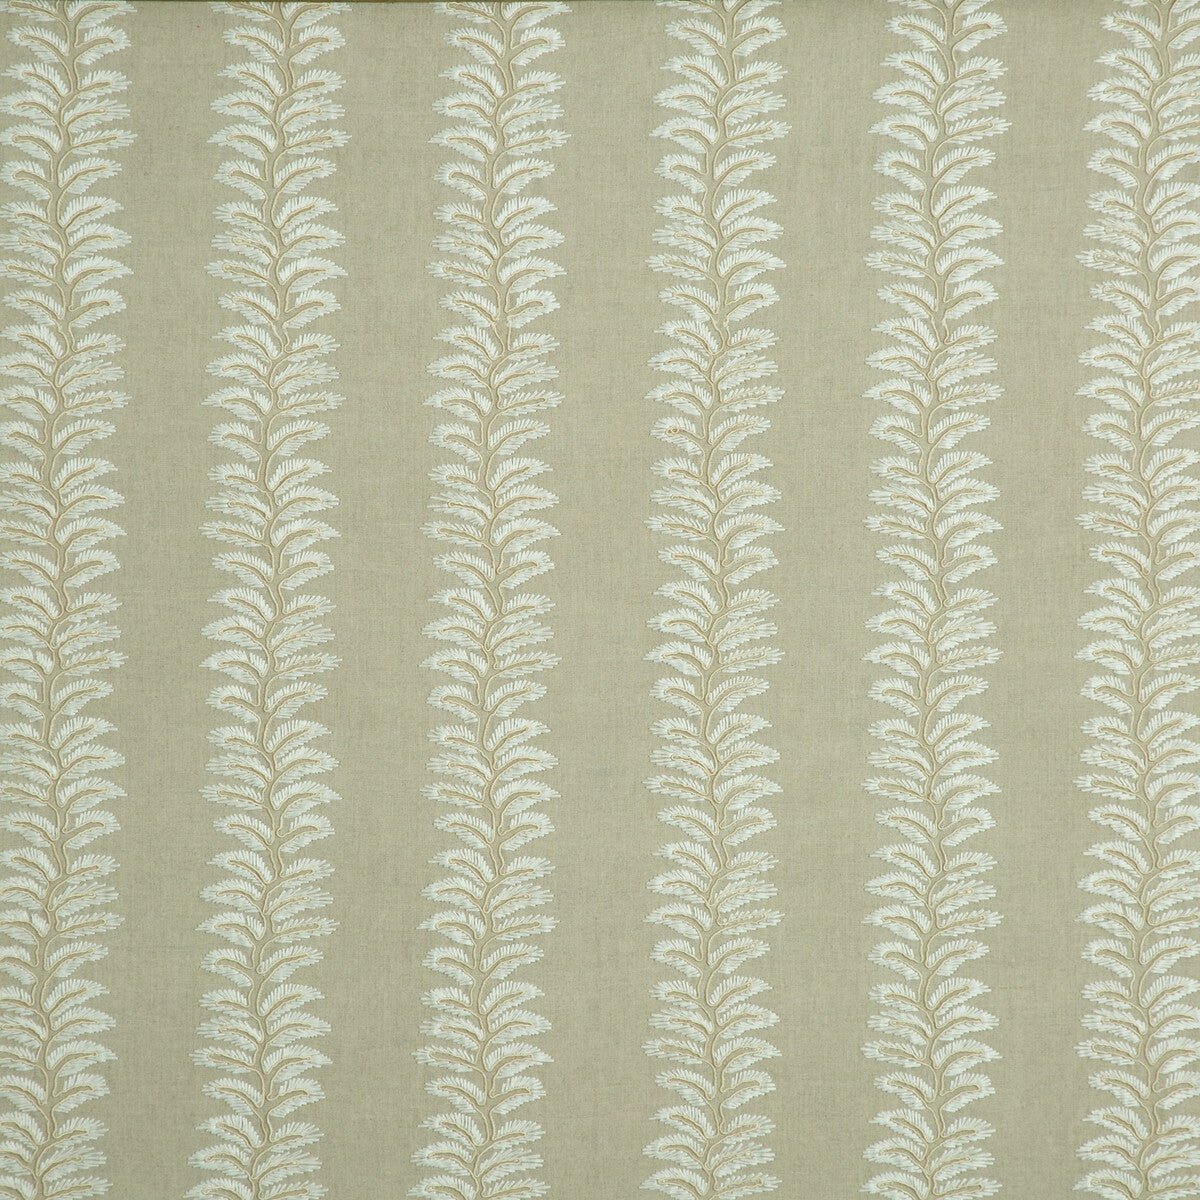 Bradbourne fabric in linen color - pattern BF10533.110.0 - by G P &amp; J Baker in the Langdale collection